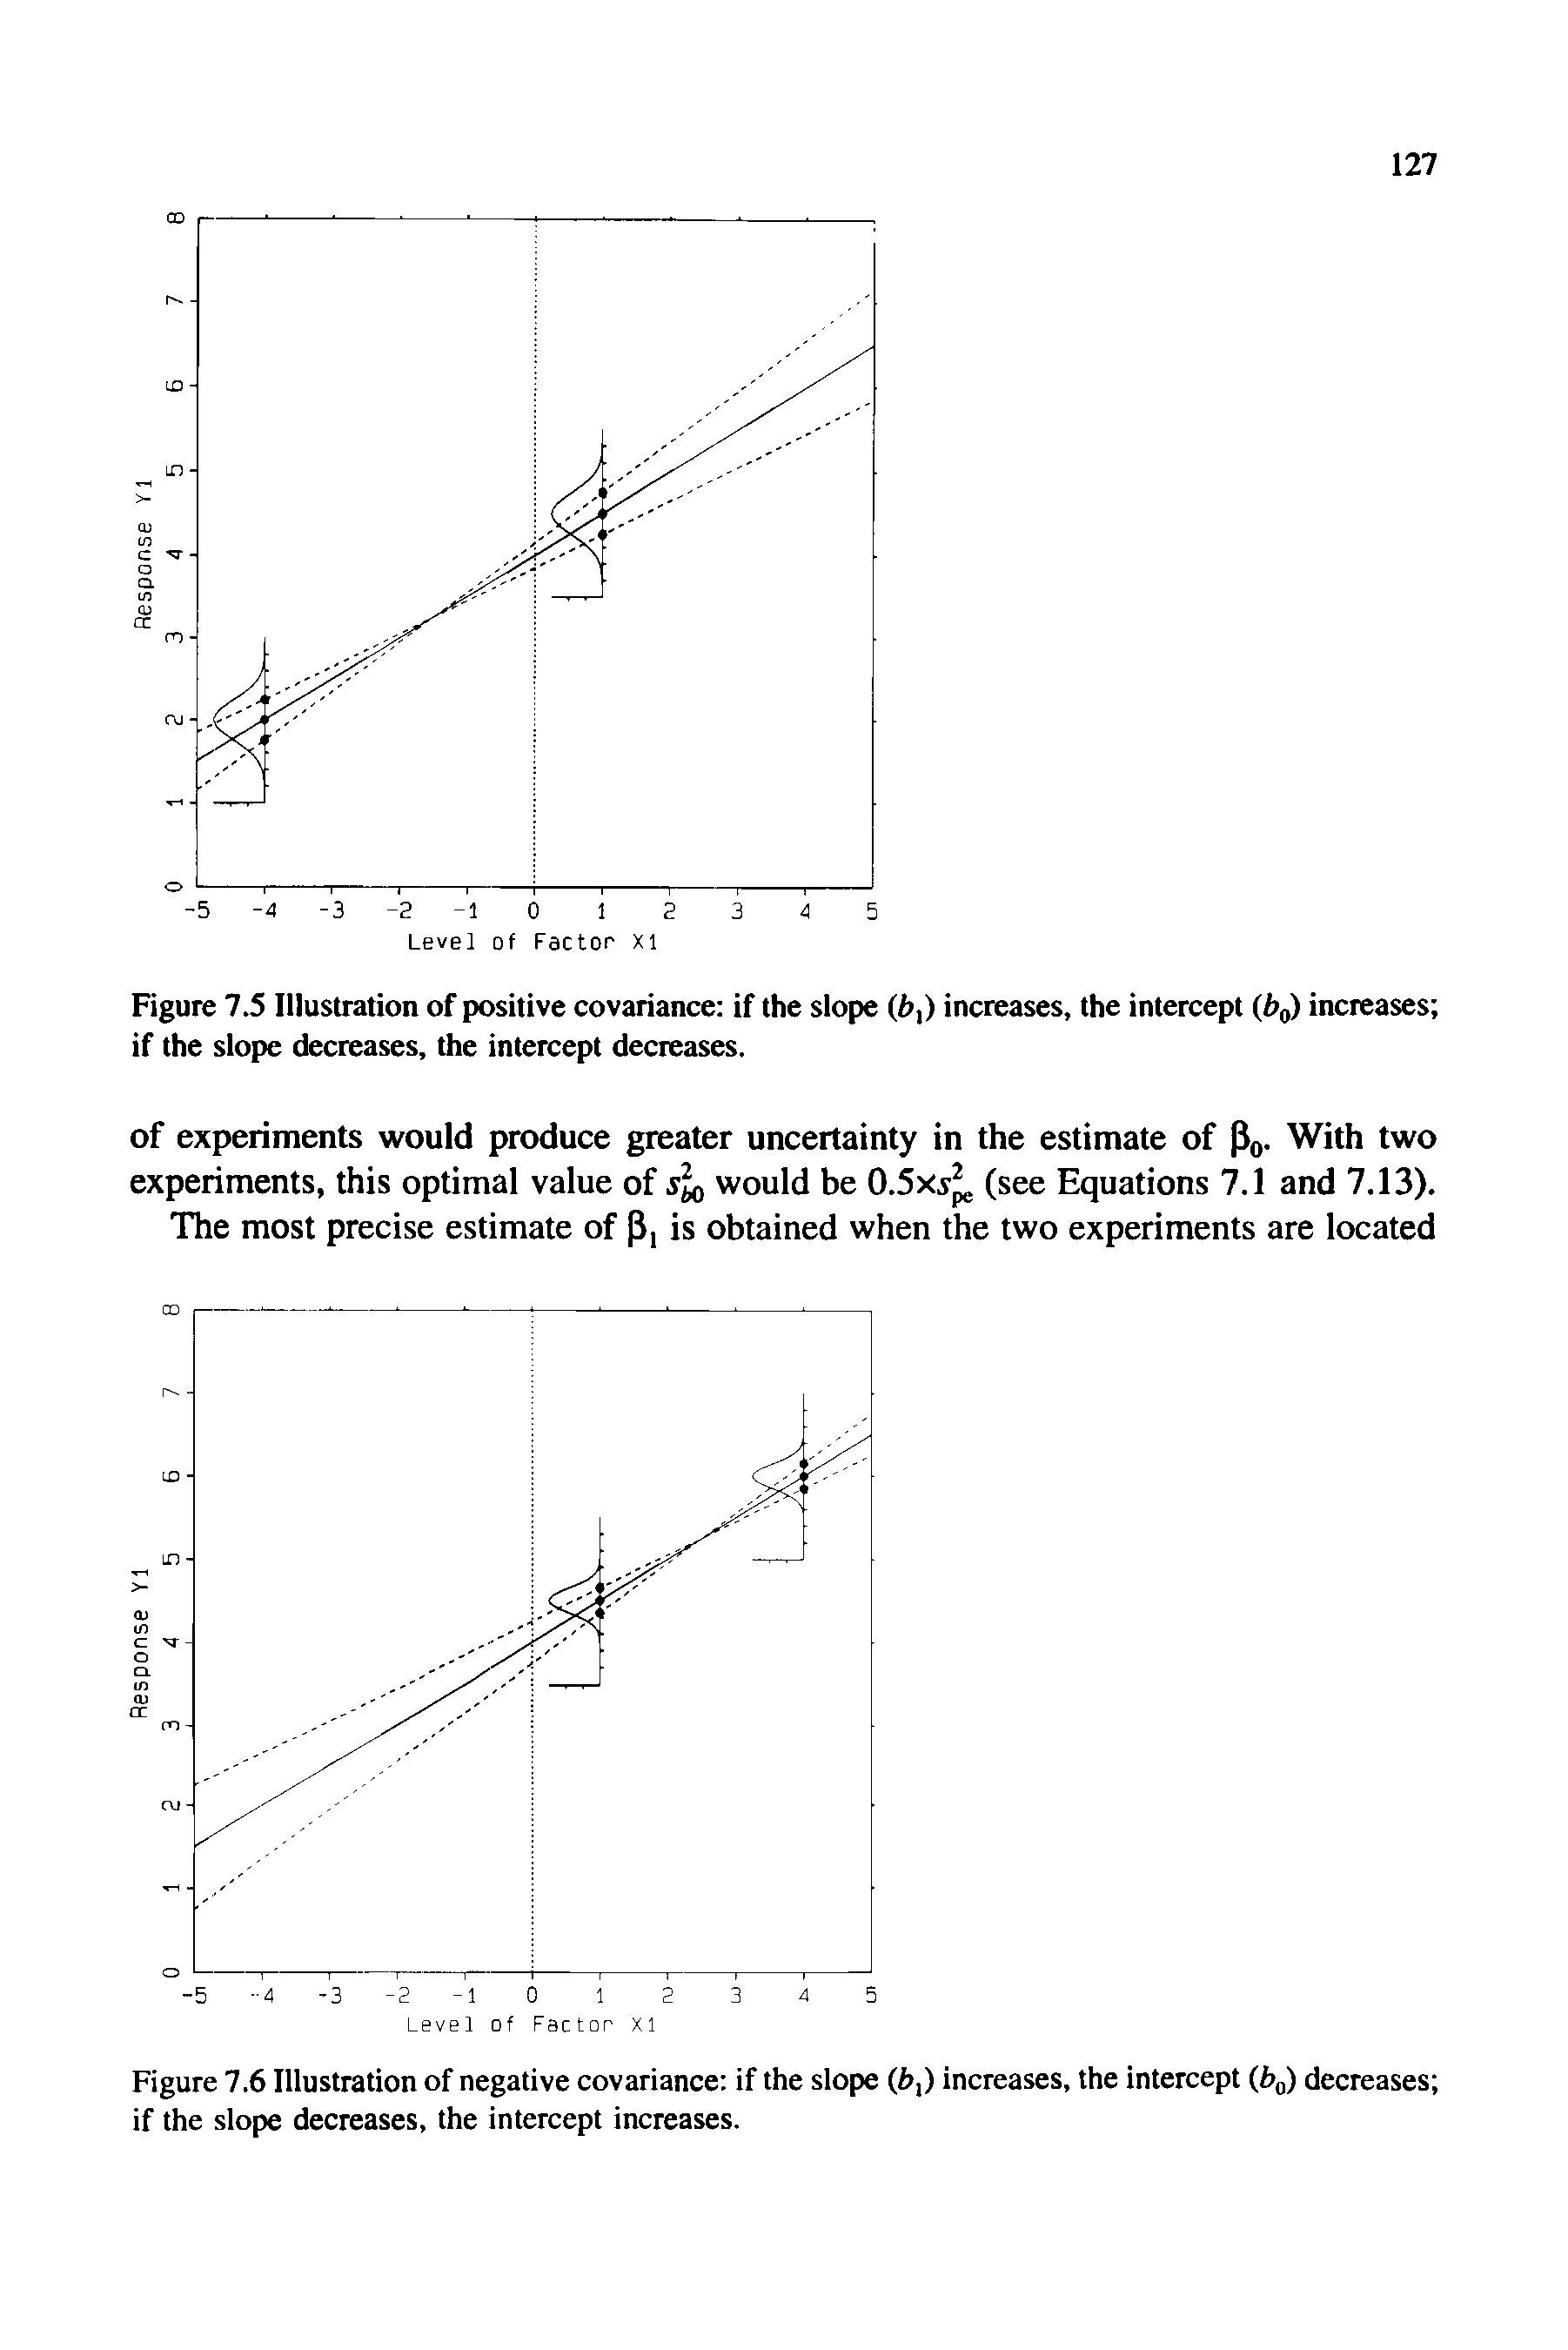 Figure 7.6 Illustration of negative covariance if the slope (6,) increases, the intercept (6 ) decreases if the slope decreases, the intercept increases.